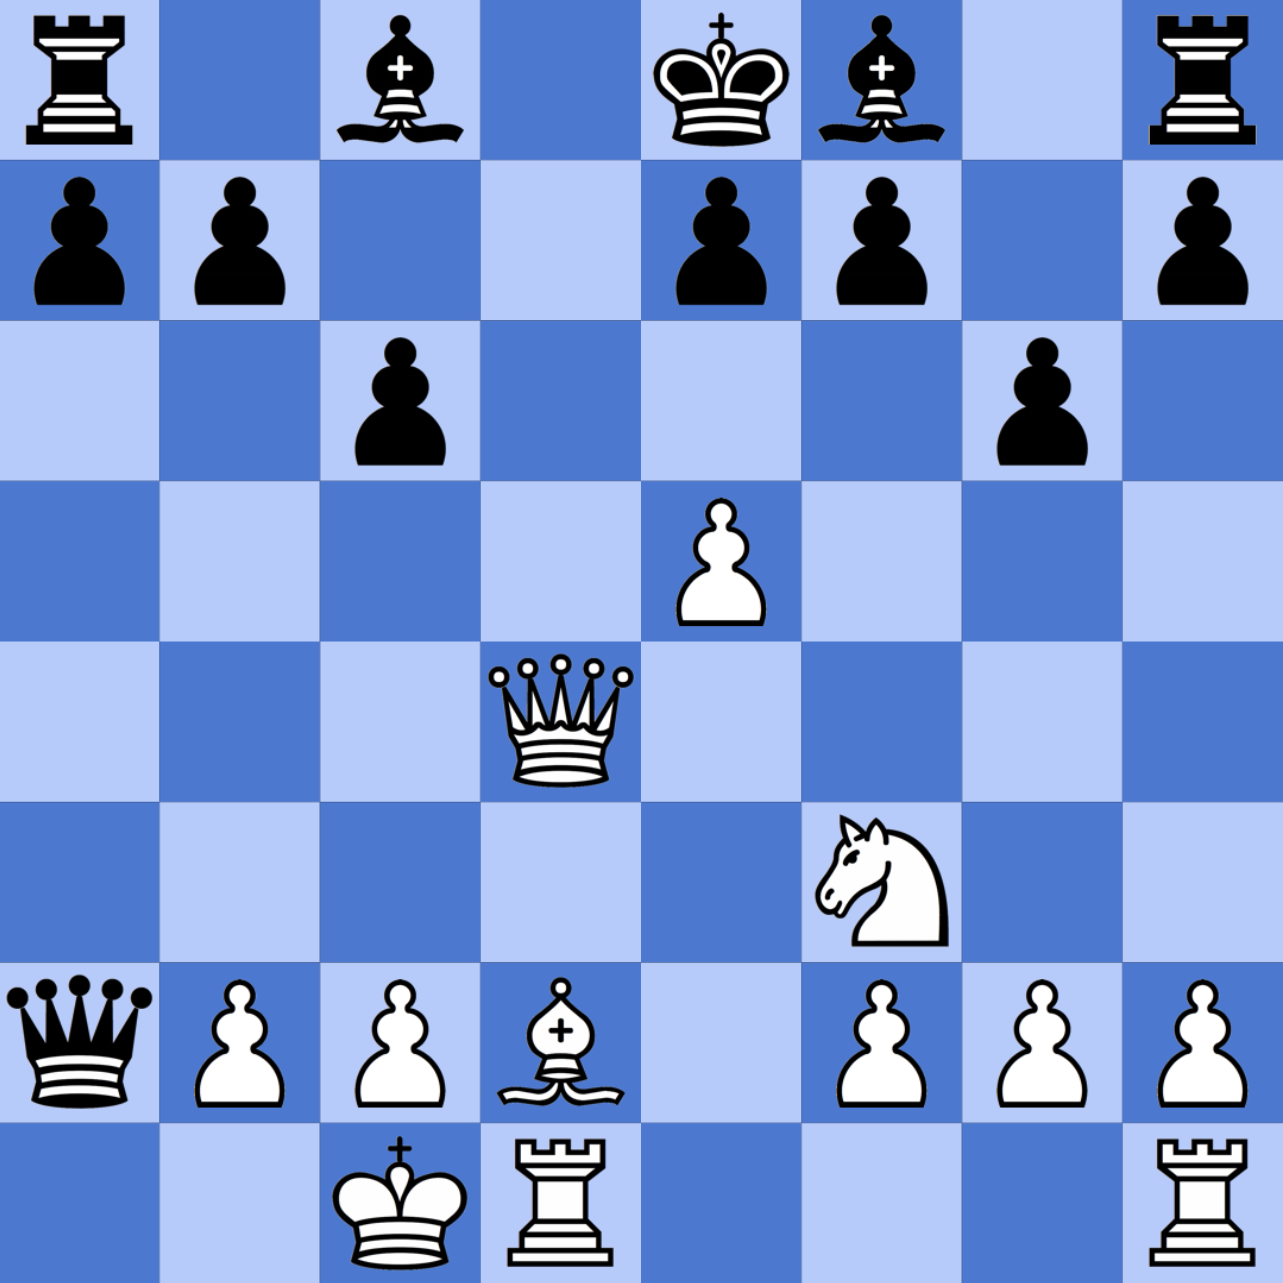 How do you even cheat in chess?